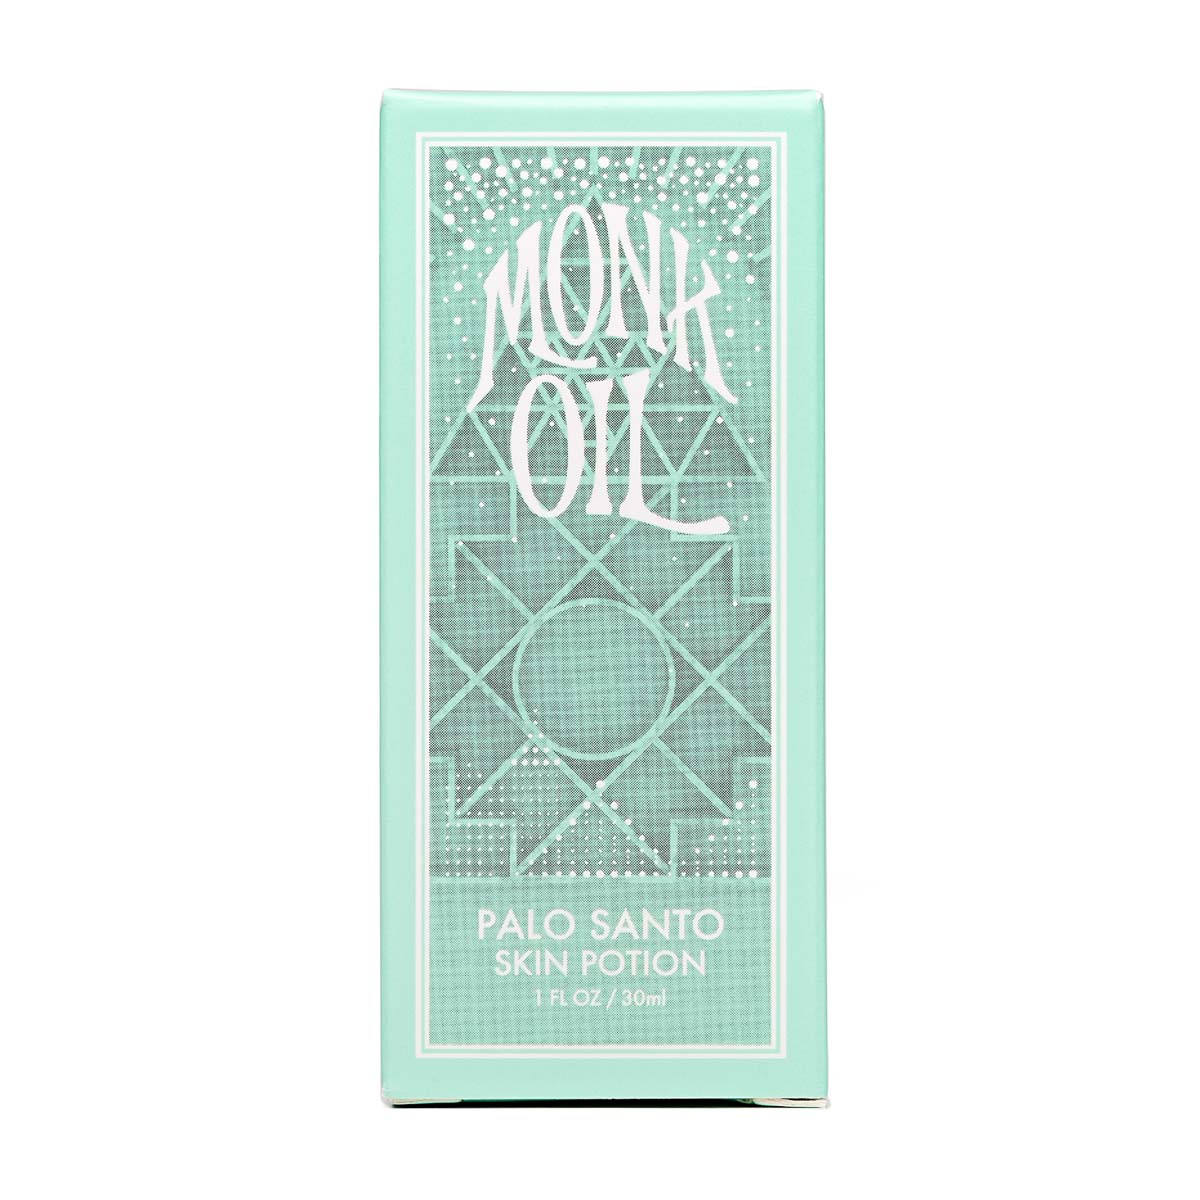 Palo Santo City Skin Potion | Monk Oil | Raw Living UK | Perfume | Natural Fragrance | Monk Oil Palo Santo City Skin Potion is designed to elevate both mind &amp; spirit. Cleansing Palo Santo blended with grounding Vetiver. Can be used as a perfume.